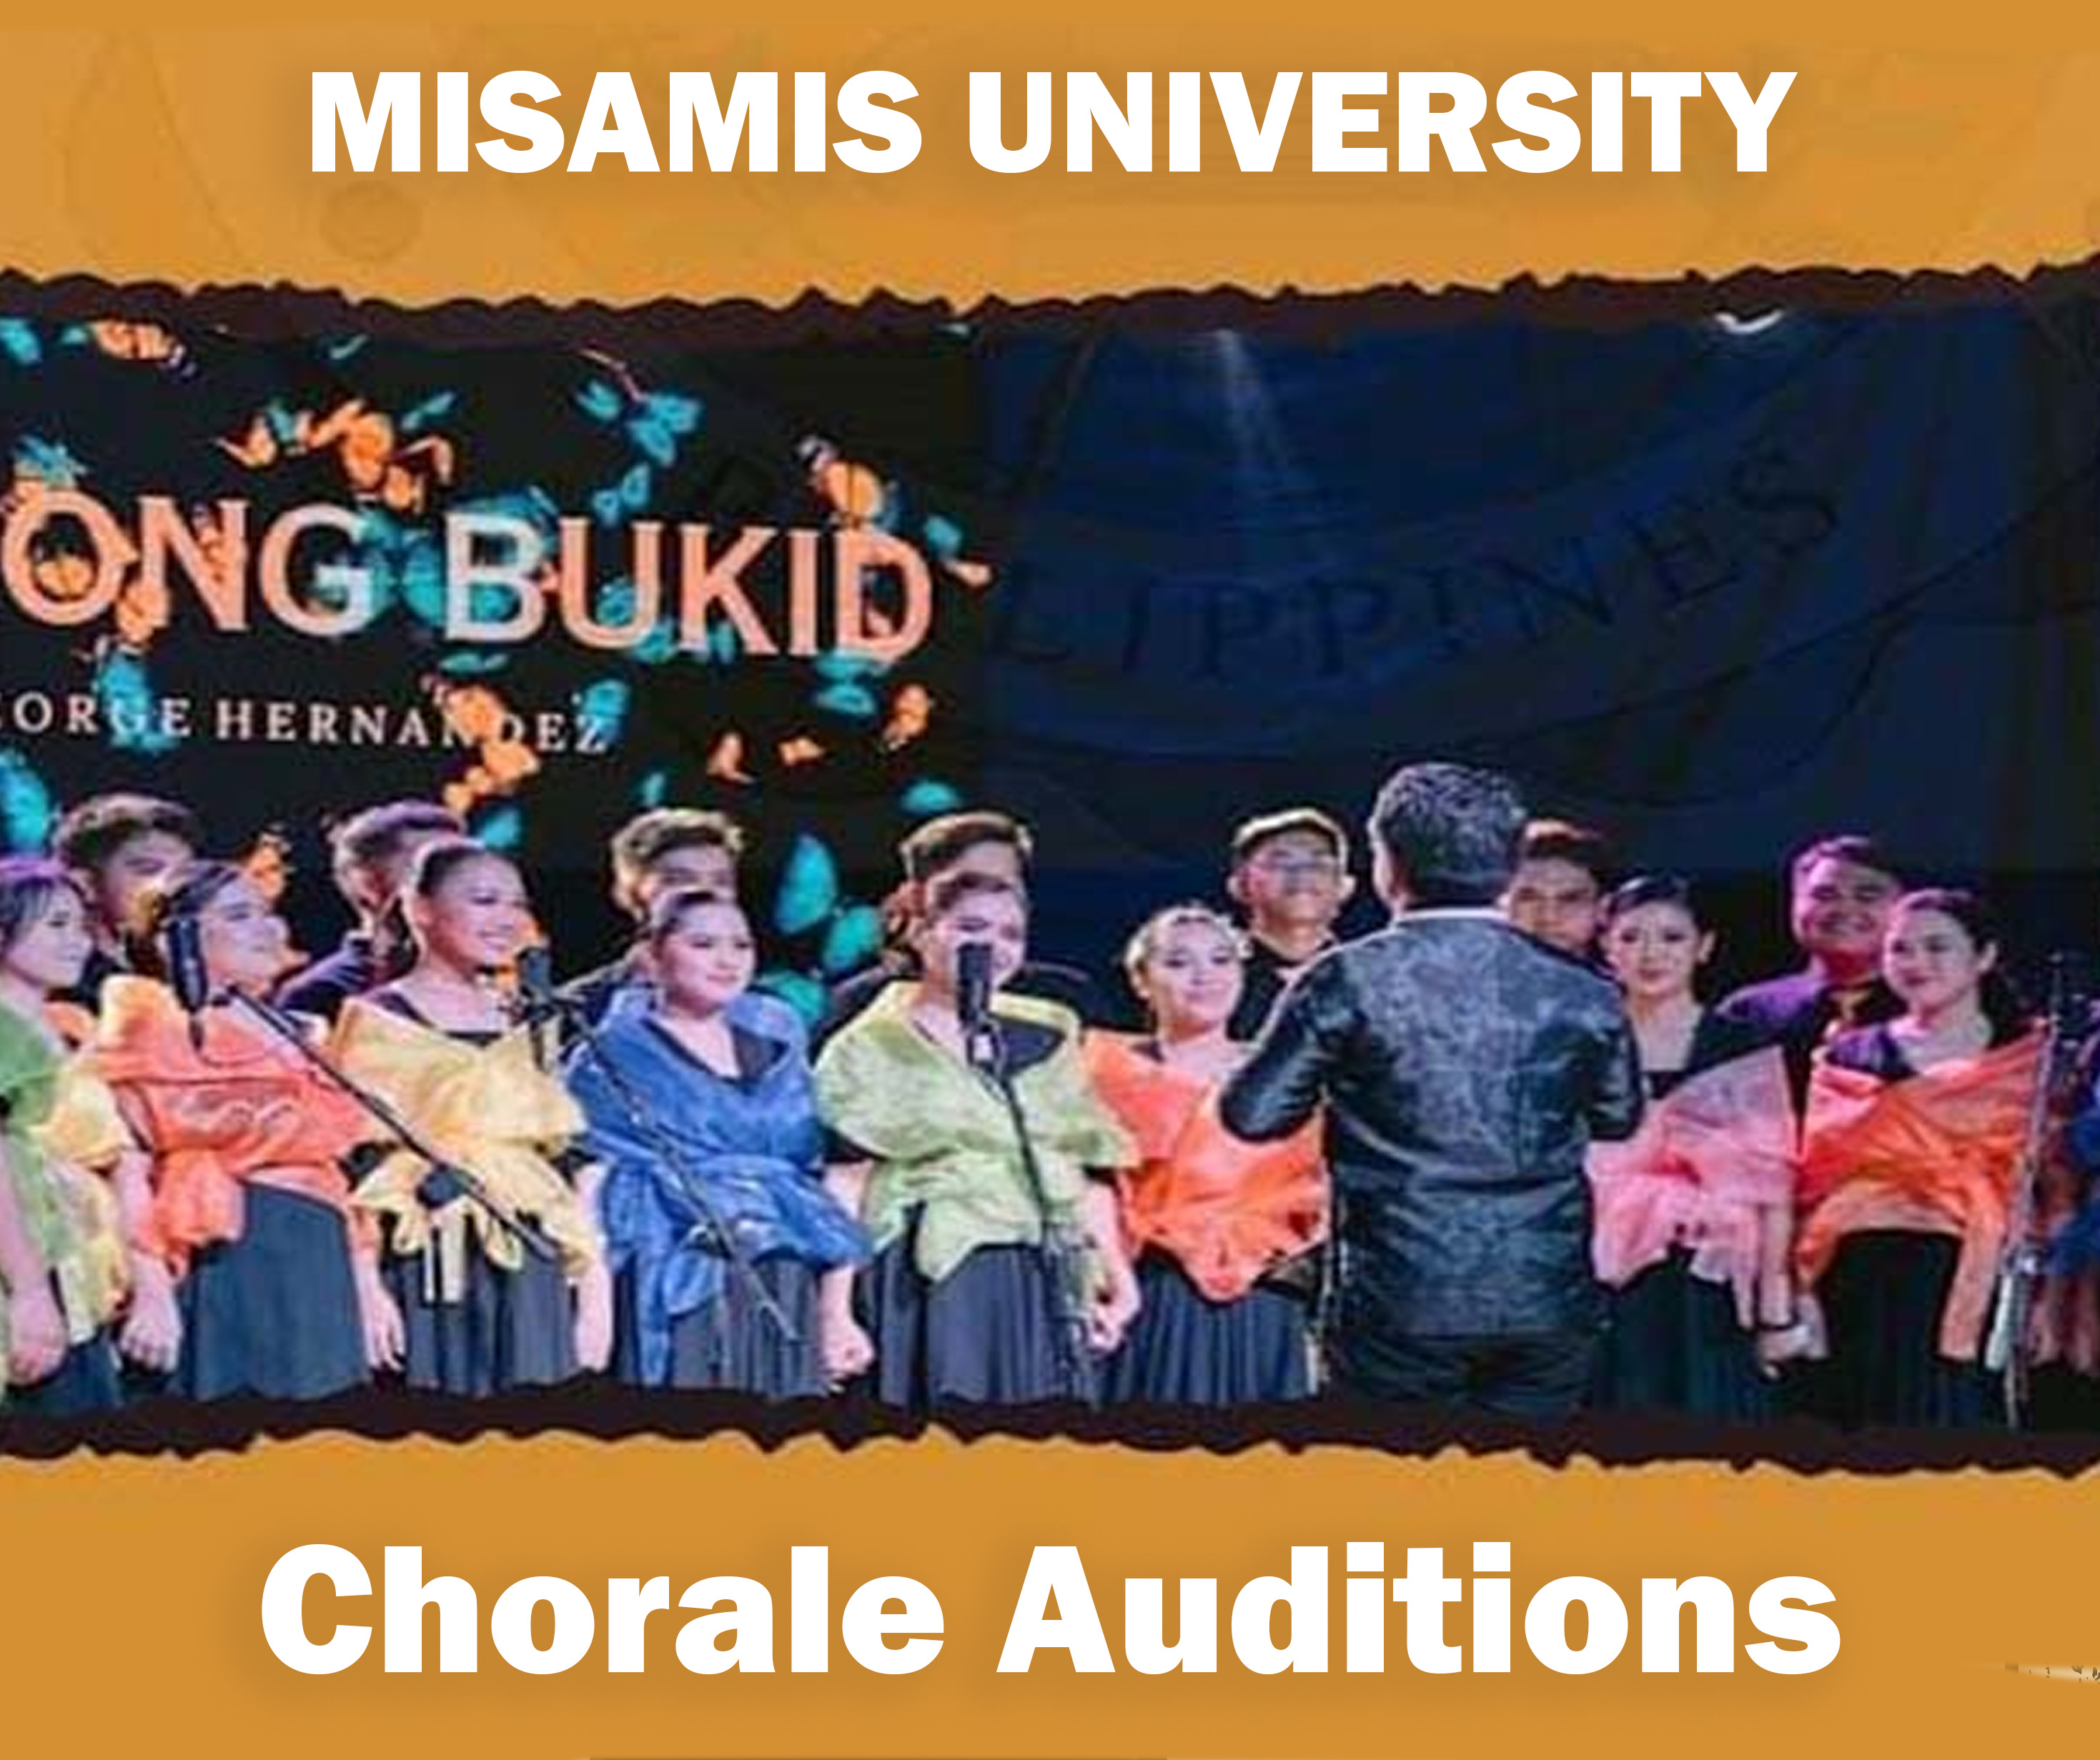 Misamis University Chorale auditions are now open!